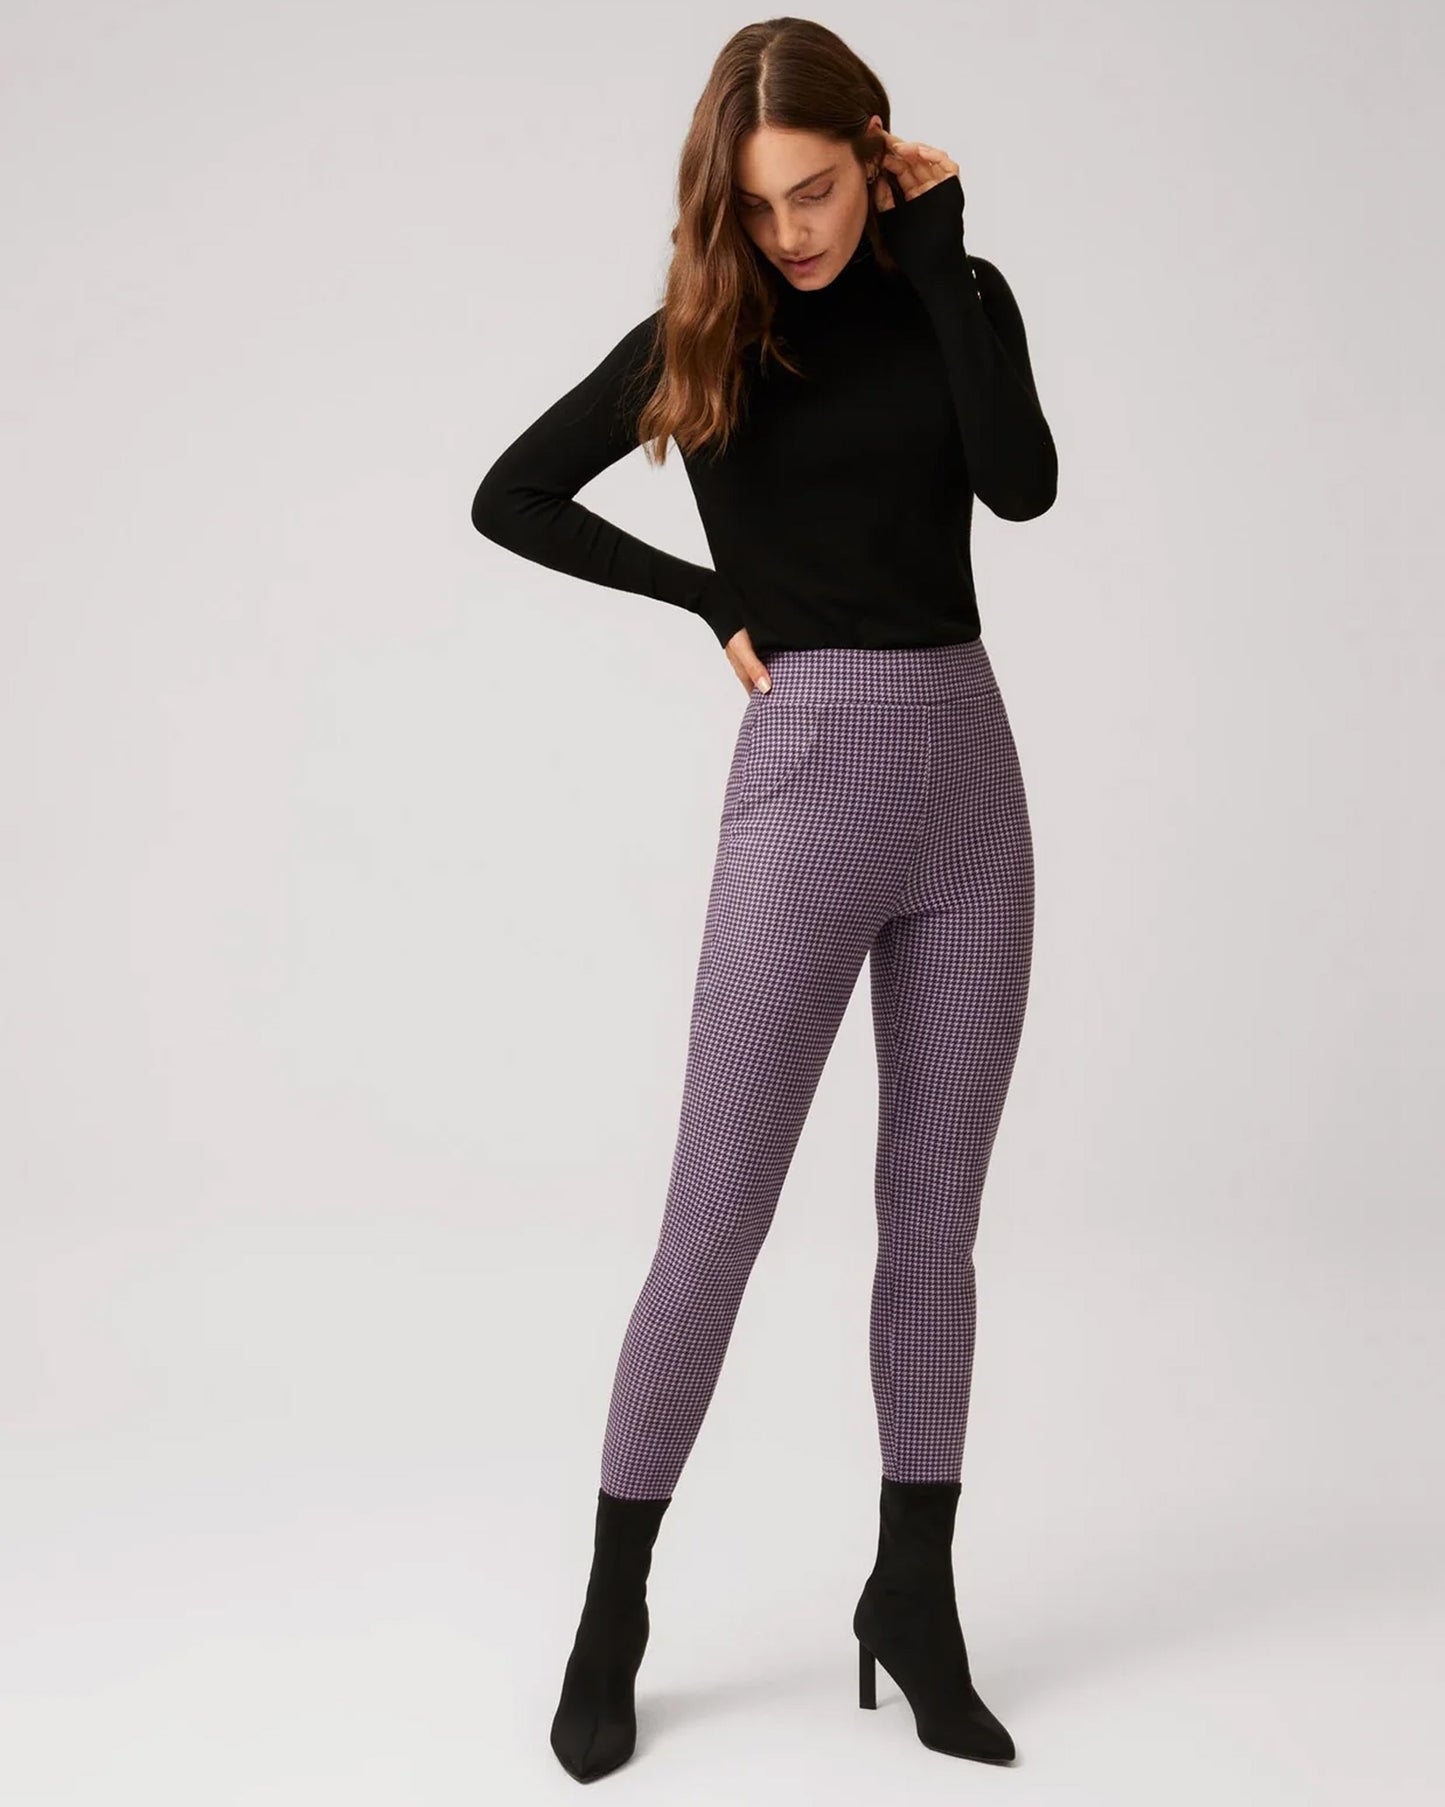 Ysabel Mora 70402 Houndstooth Leggings - High waisted purple trouser leggings (treggings) with a black micro houndstooth style pattern and faux front pockets, worn with black polo neck and black high heel boots.